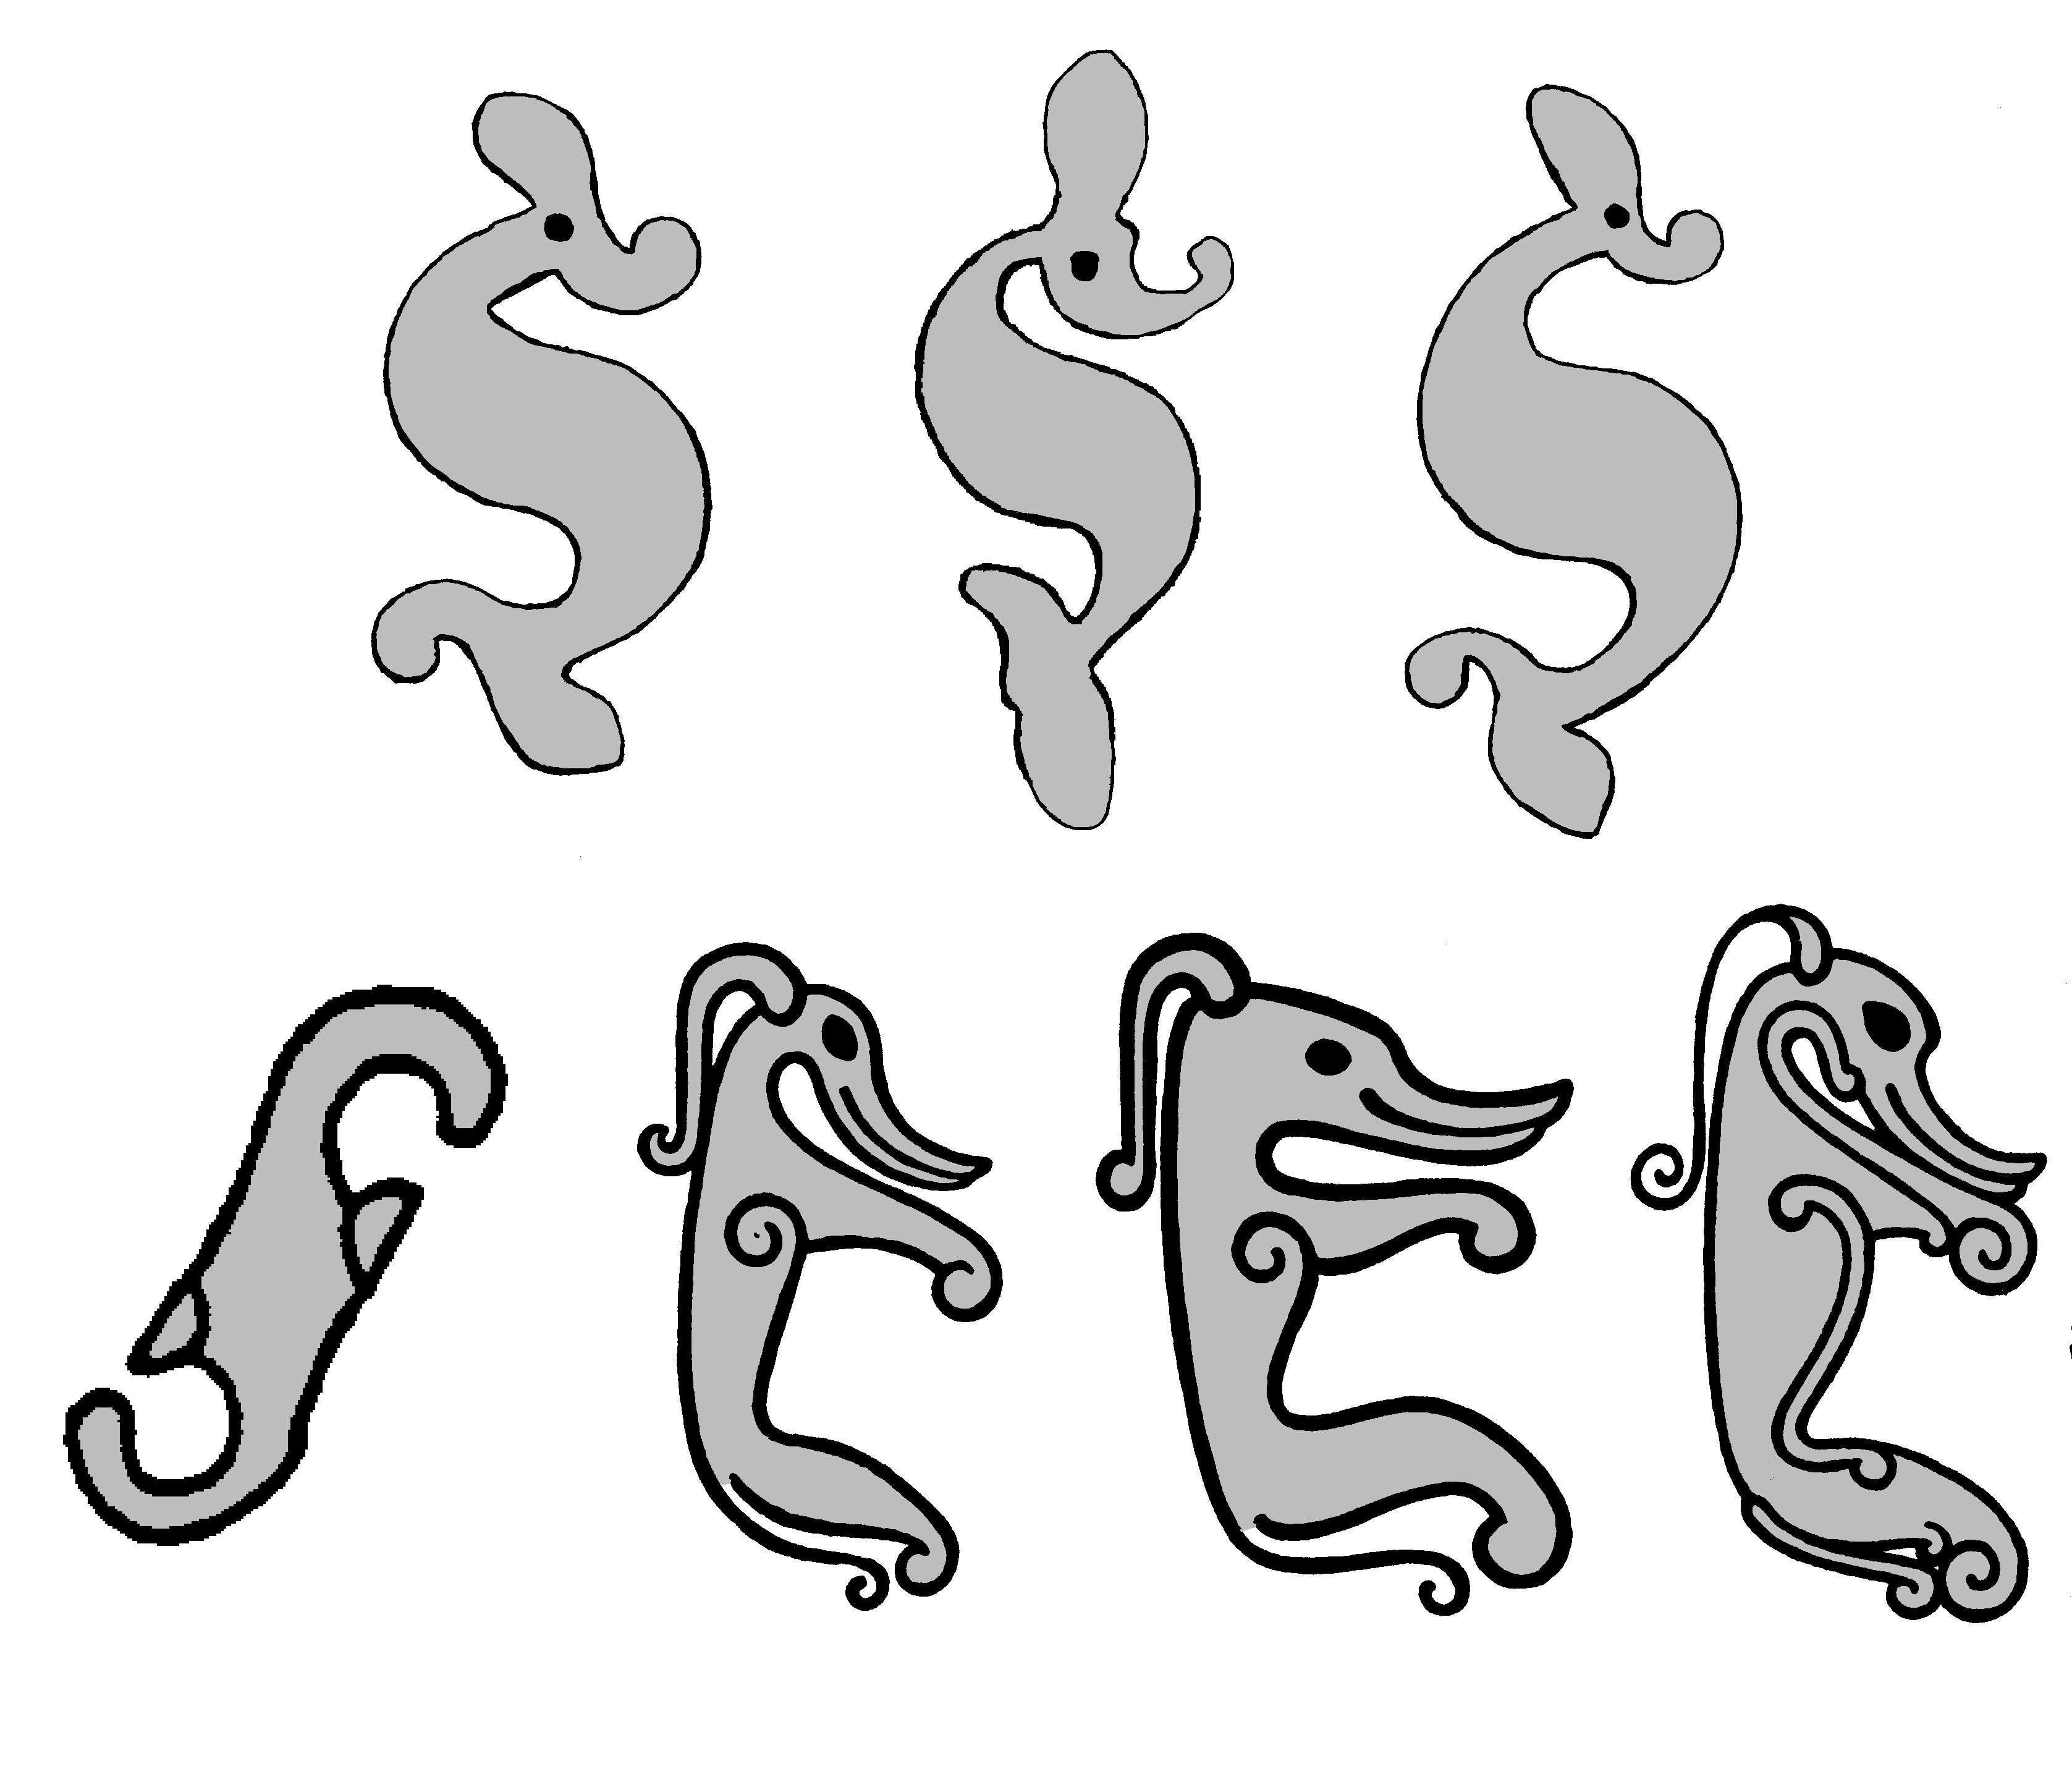 Simplified illustration of dragonesque brooches from Scotland